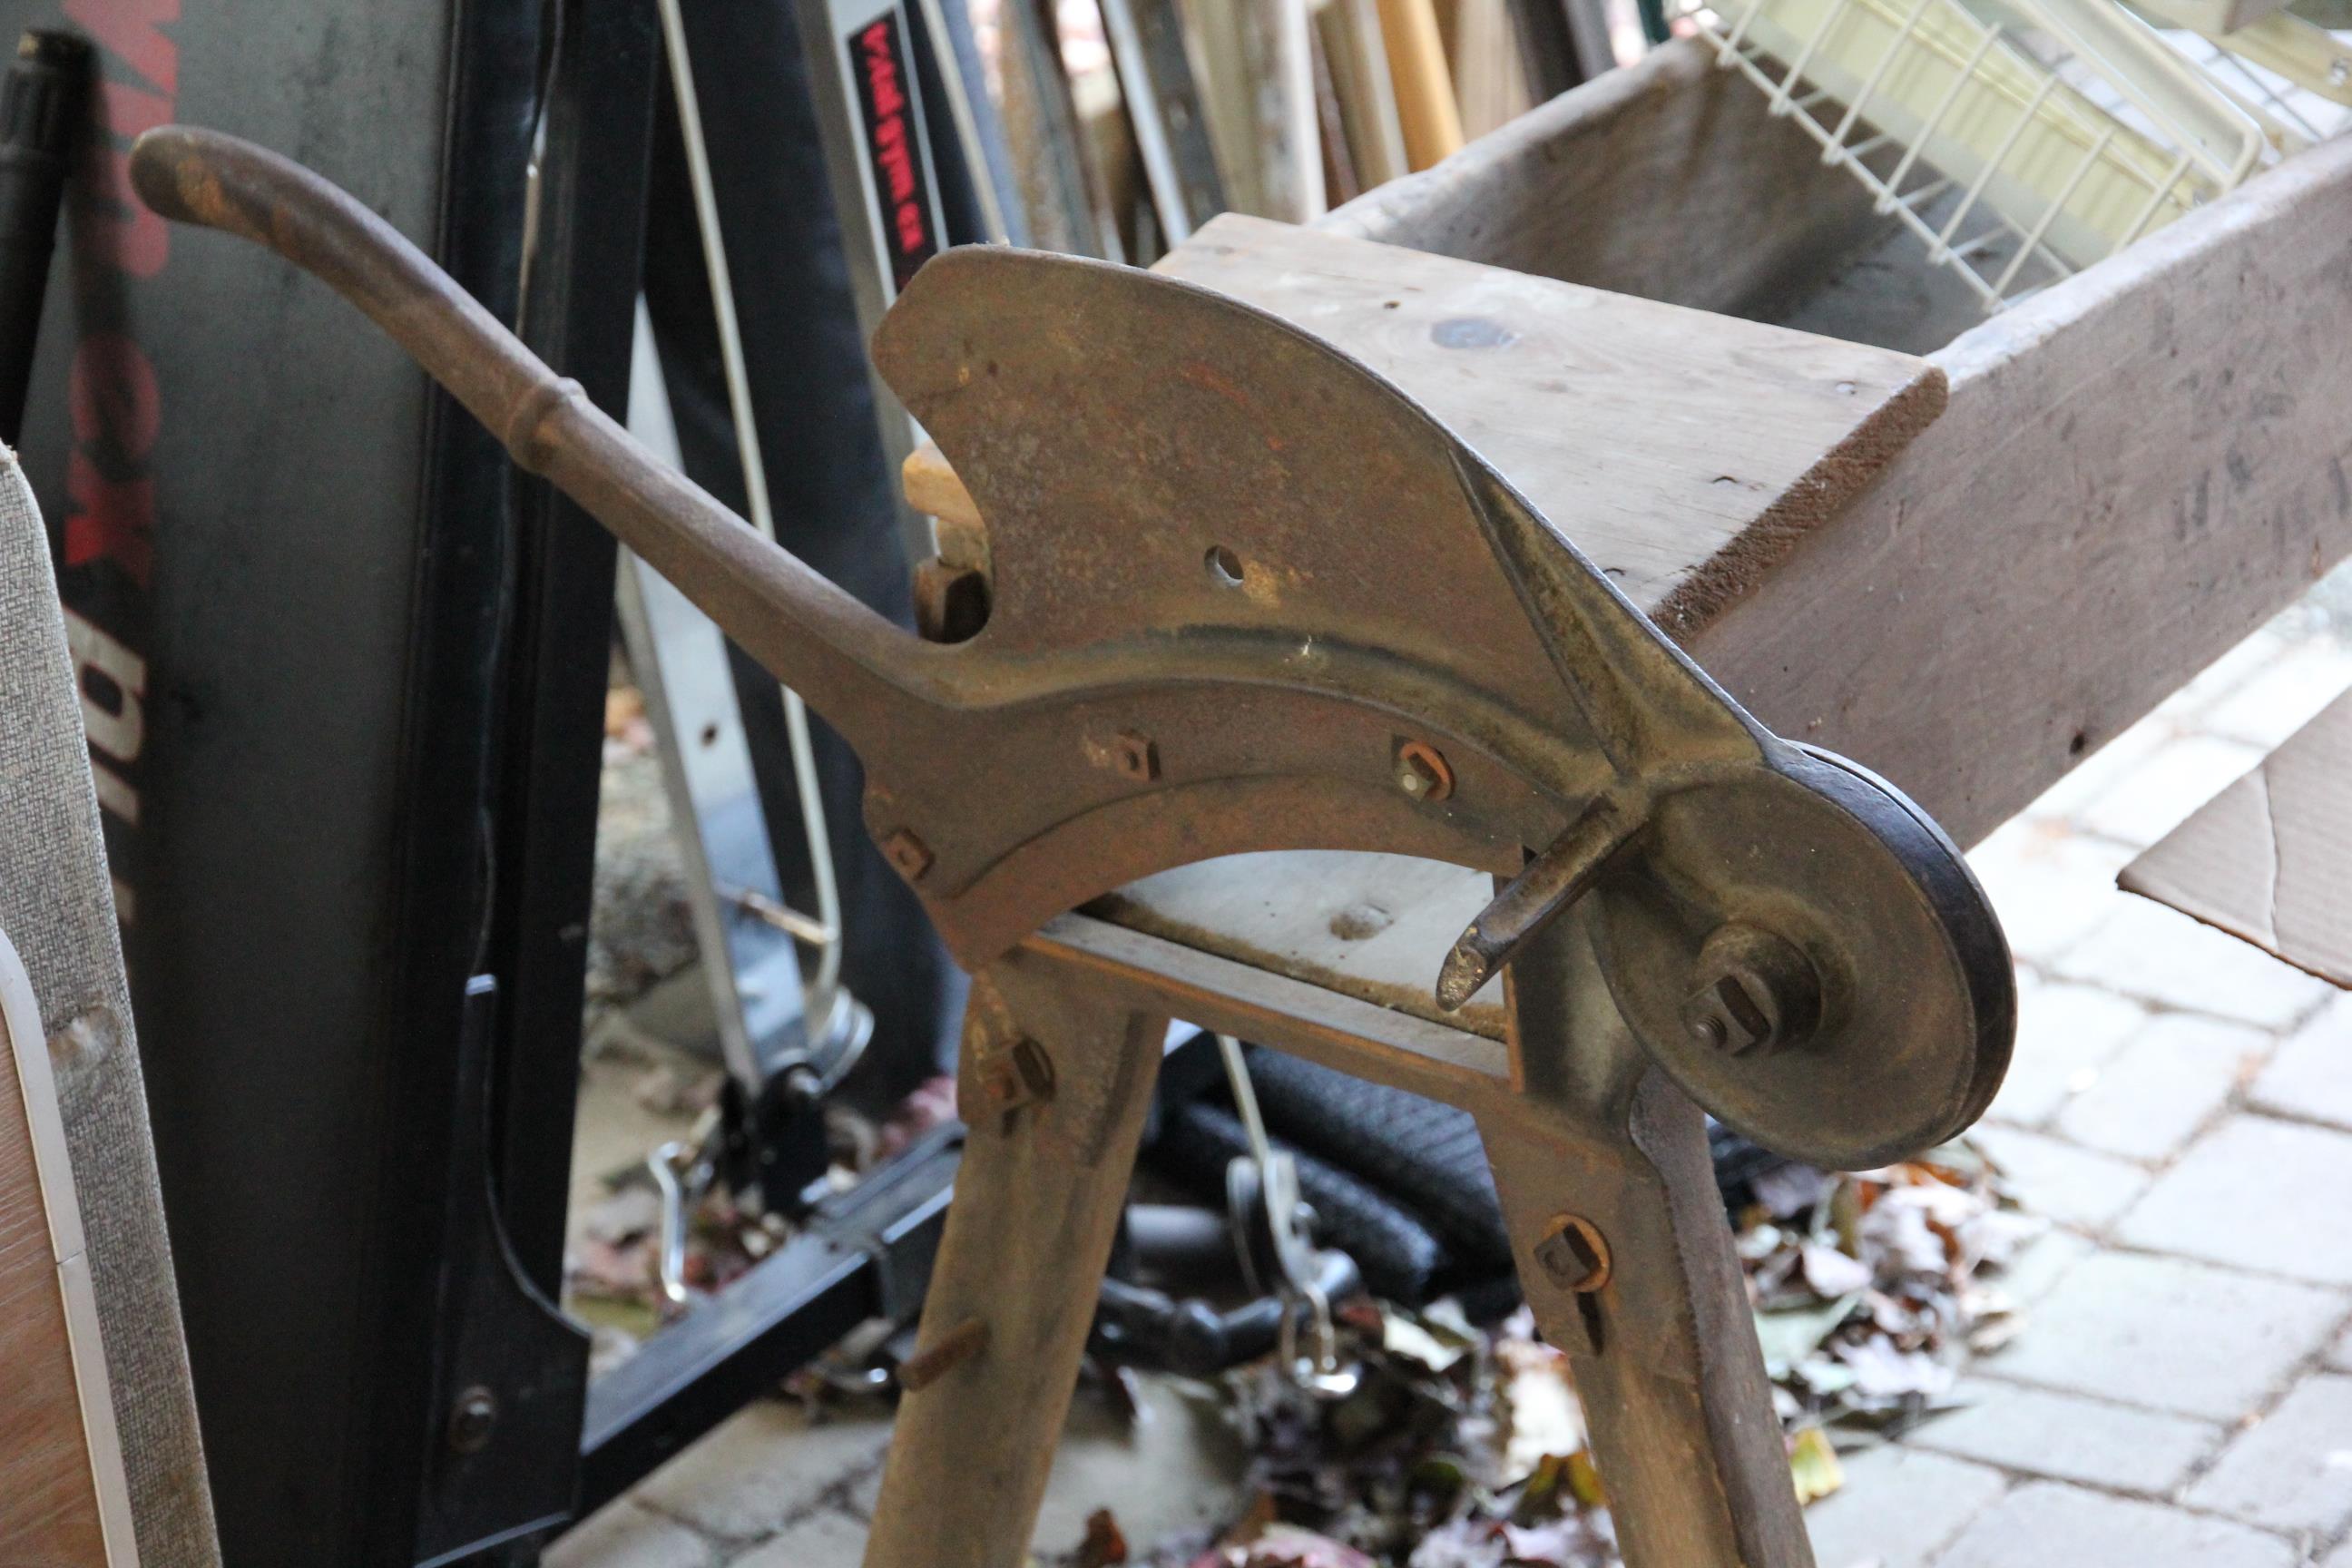 Antique straw cutter (chaff cutter), one of several antique farm implements in the sale.